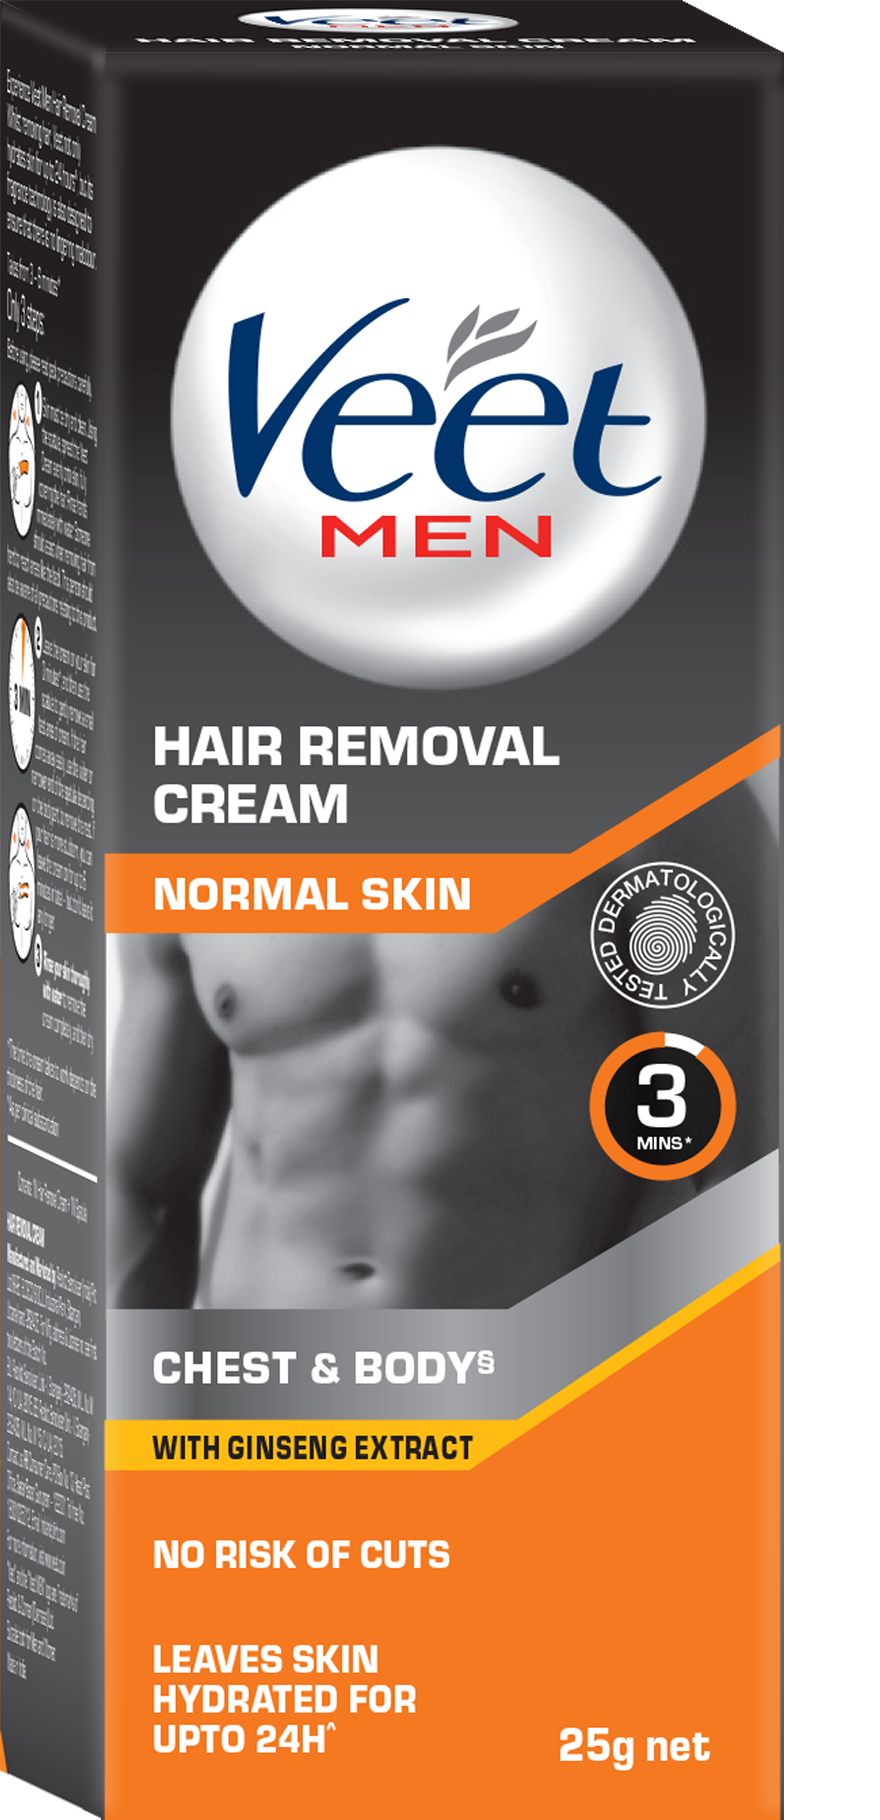 15 Hair Removal Creams for Women Wishing for Pain-free Shaving Sessions |  PINKVILLA